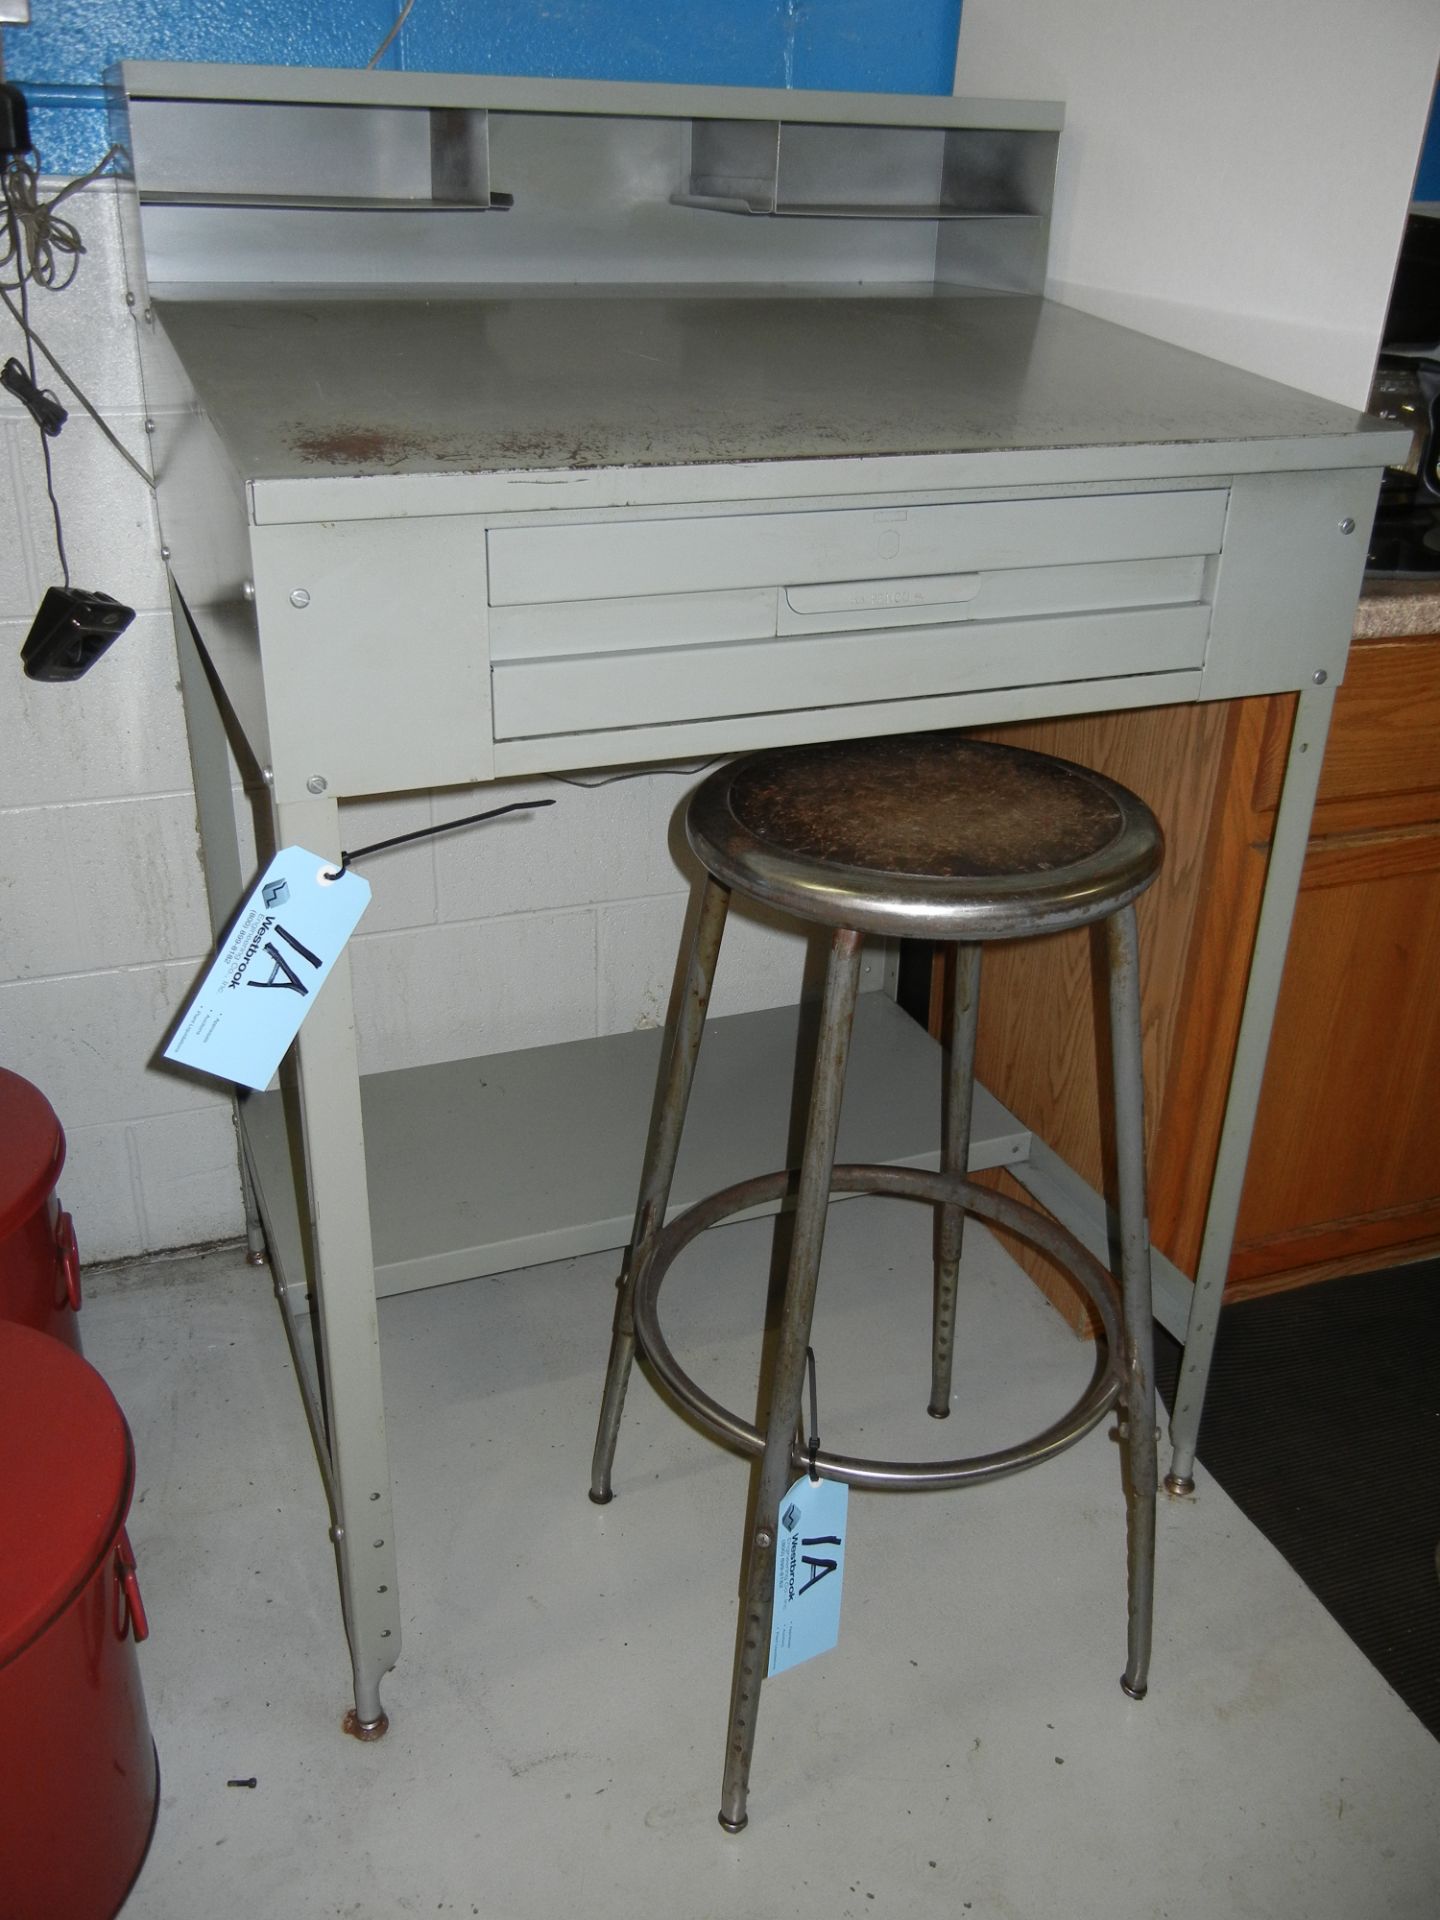 Foreman's desk with stool